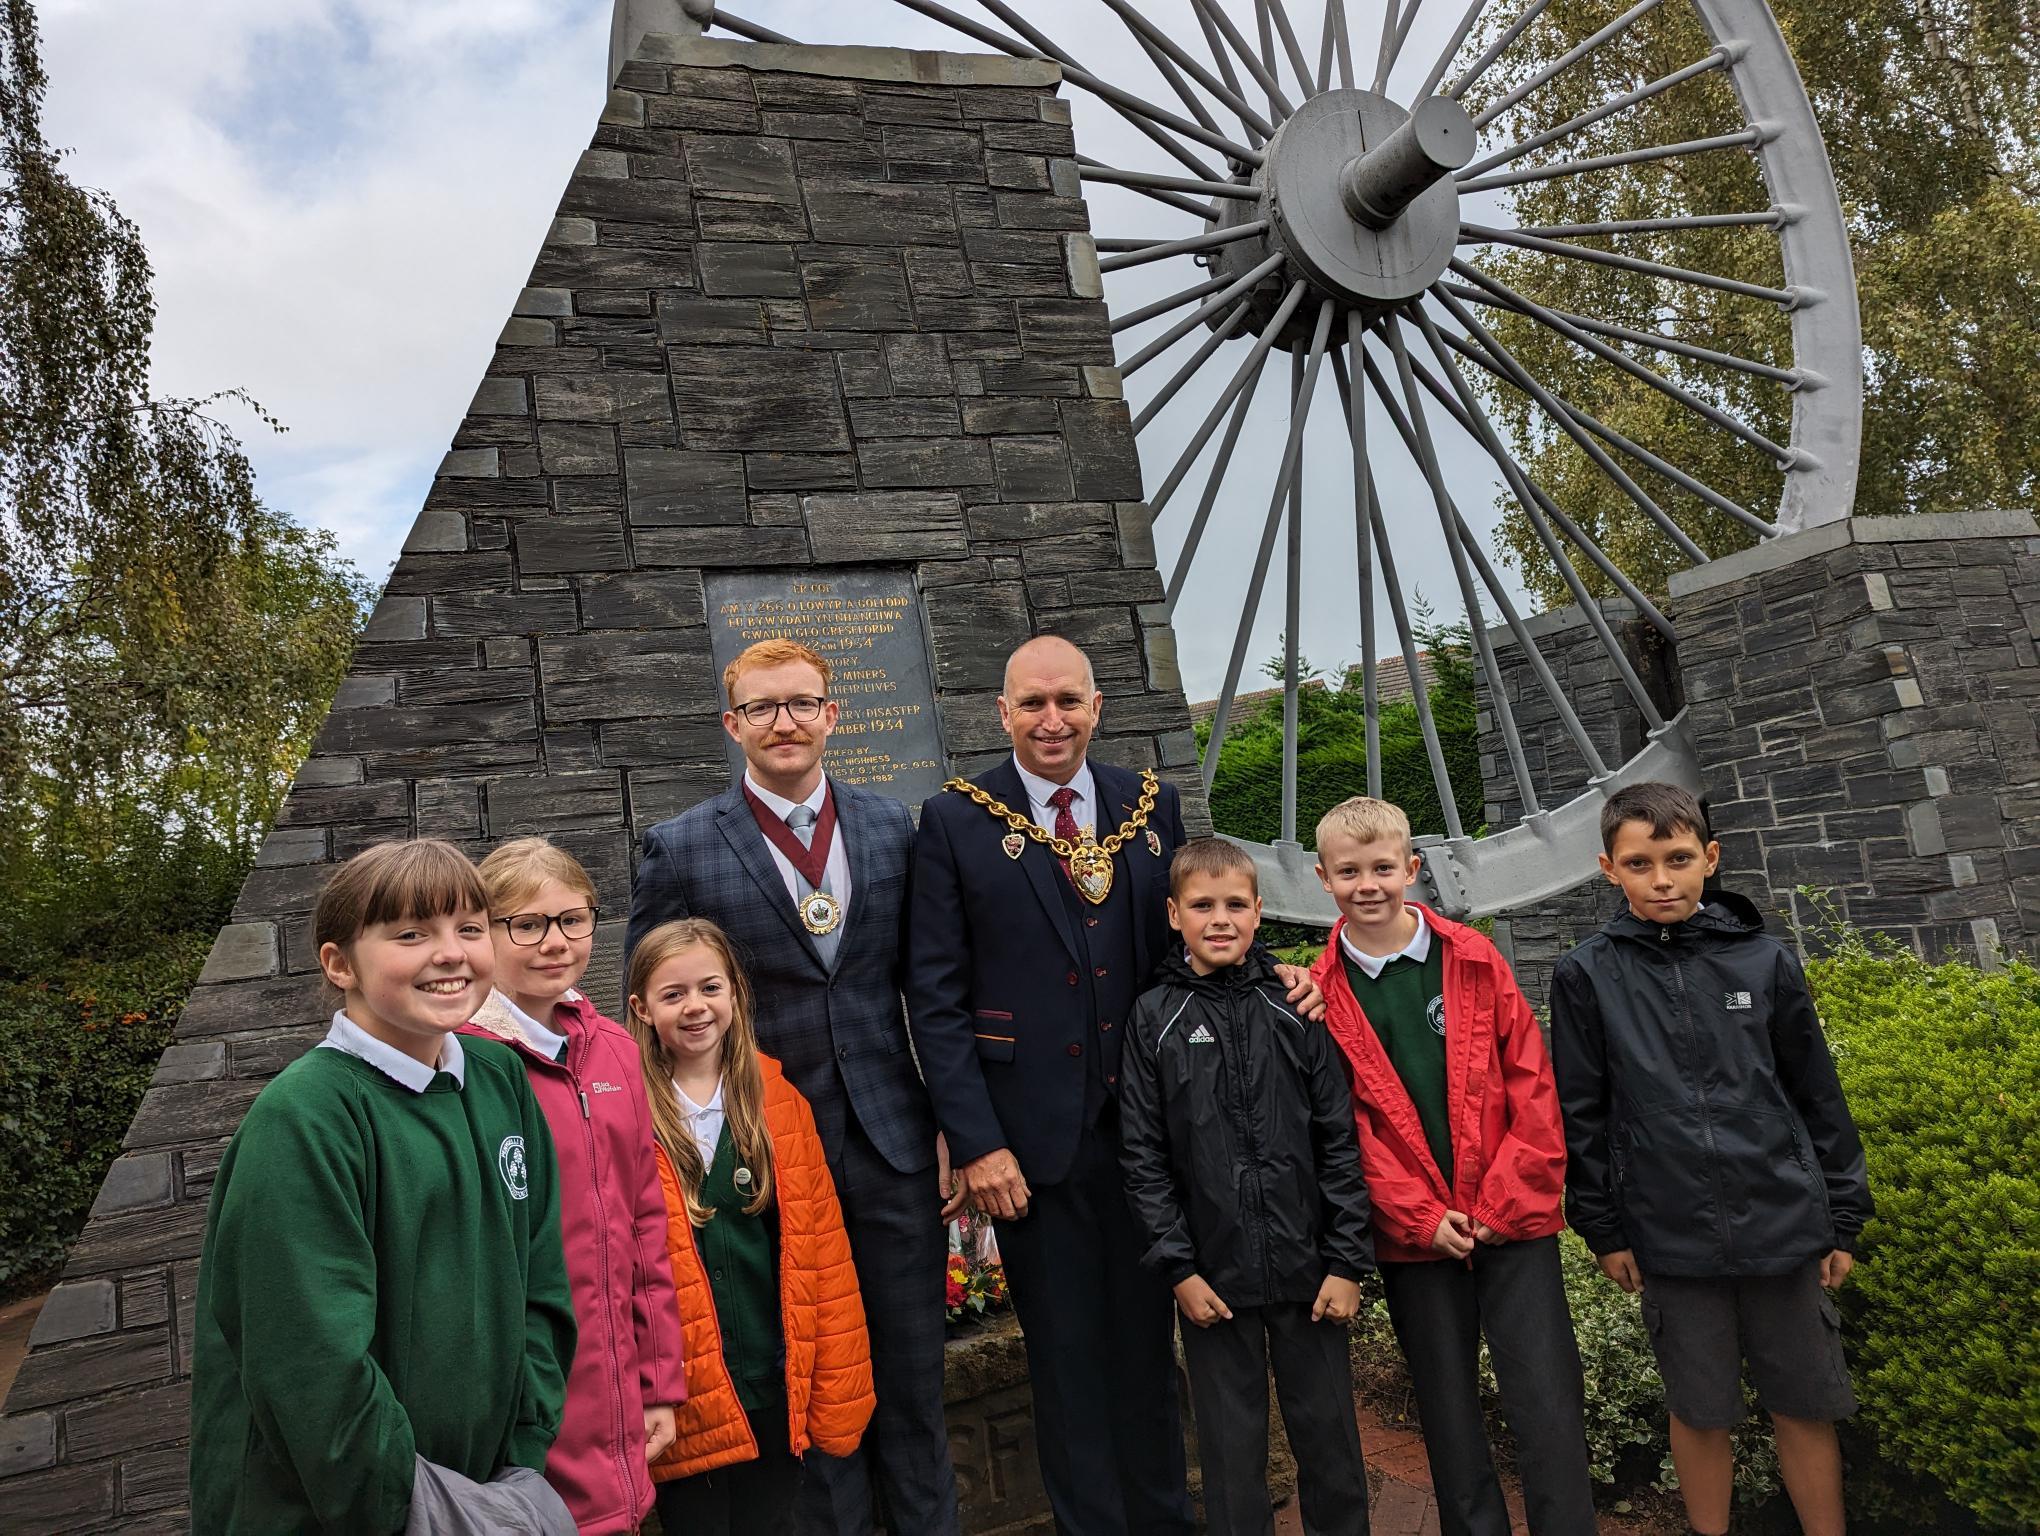 Ysgol Penygelli pupils with Mayor Cllr Andy Williams (left) and his Consort, Luke Williams.